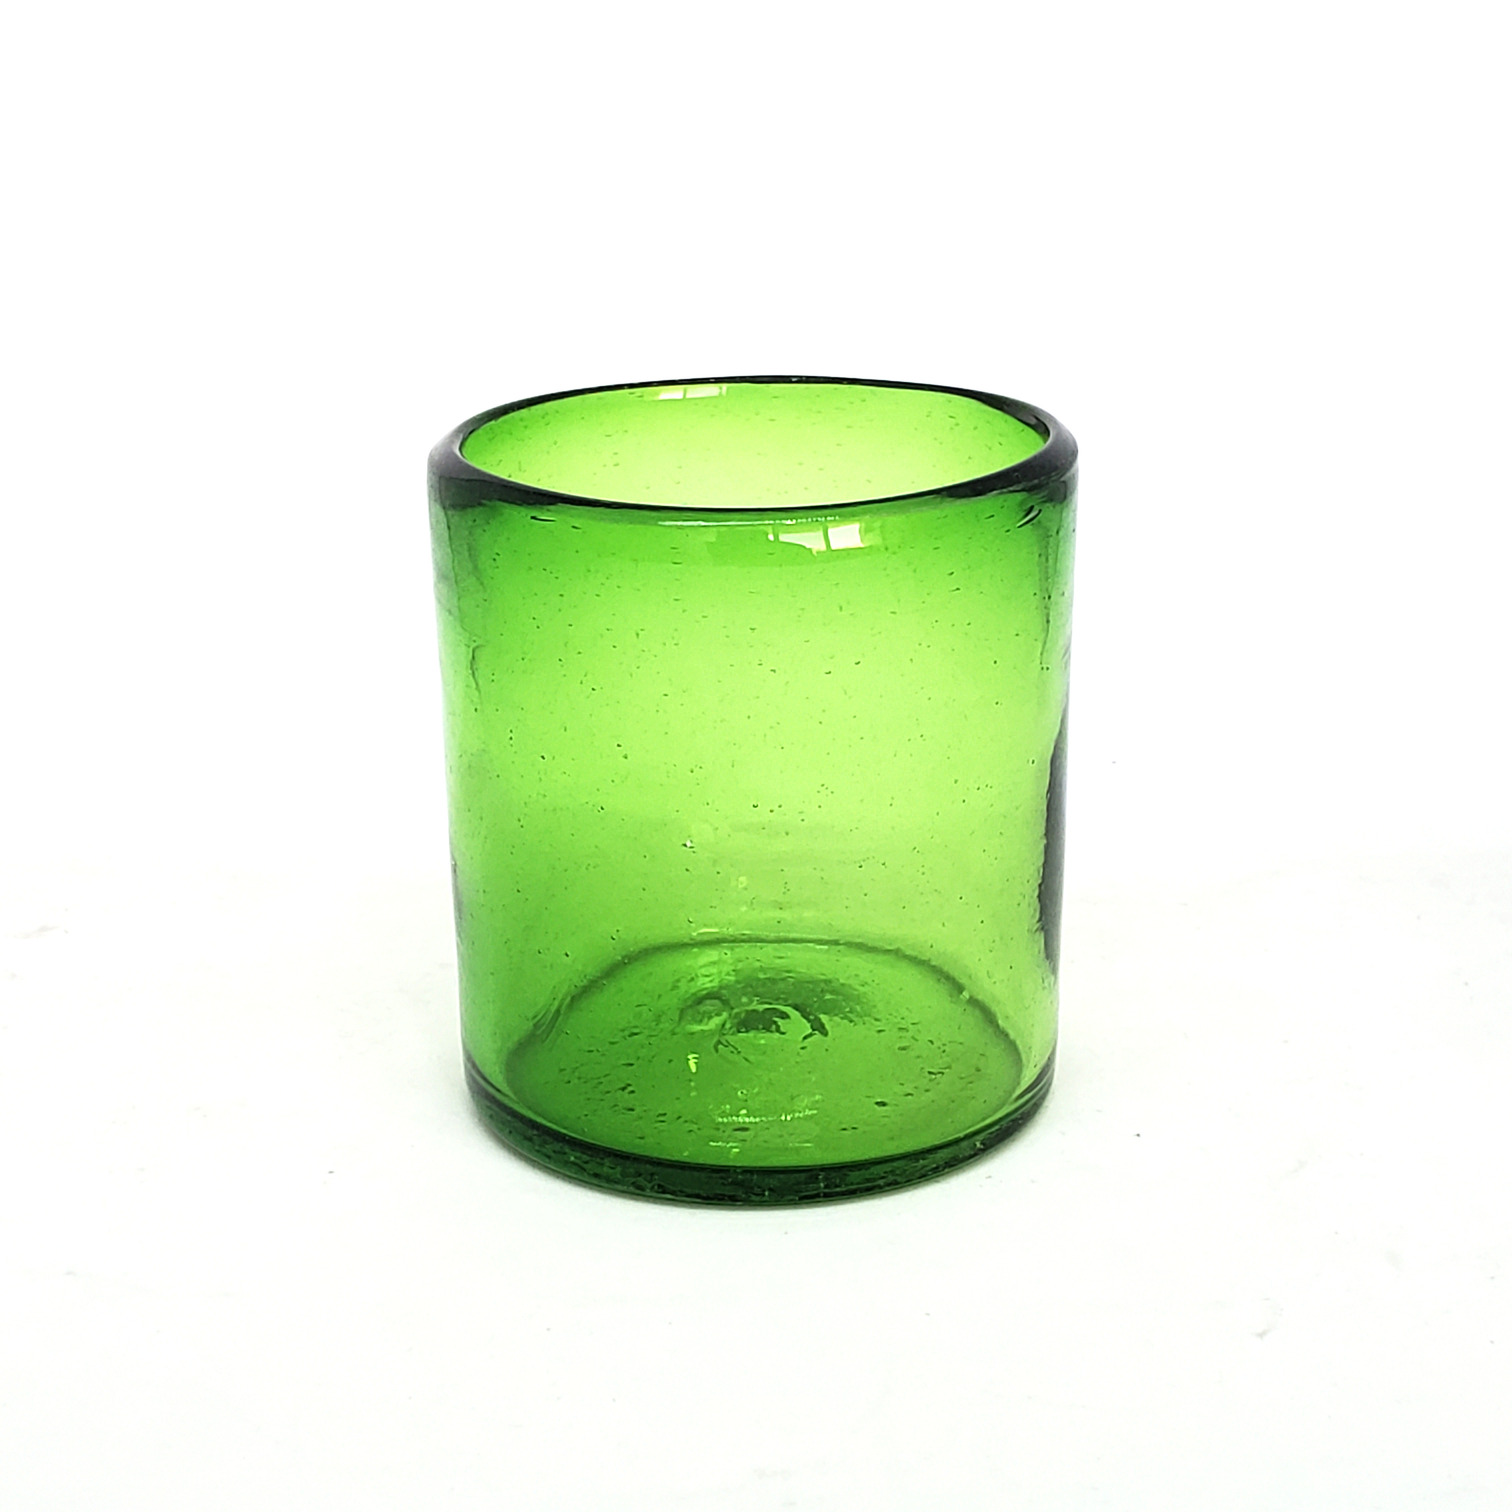 New Items / Solid Emerald Green 9 oz Short Tumblers (set of 6) / Enhance your favorite drink with these colorful handcrafted glasses.